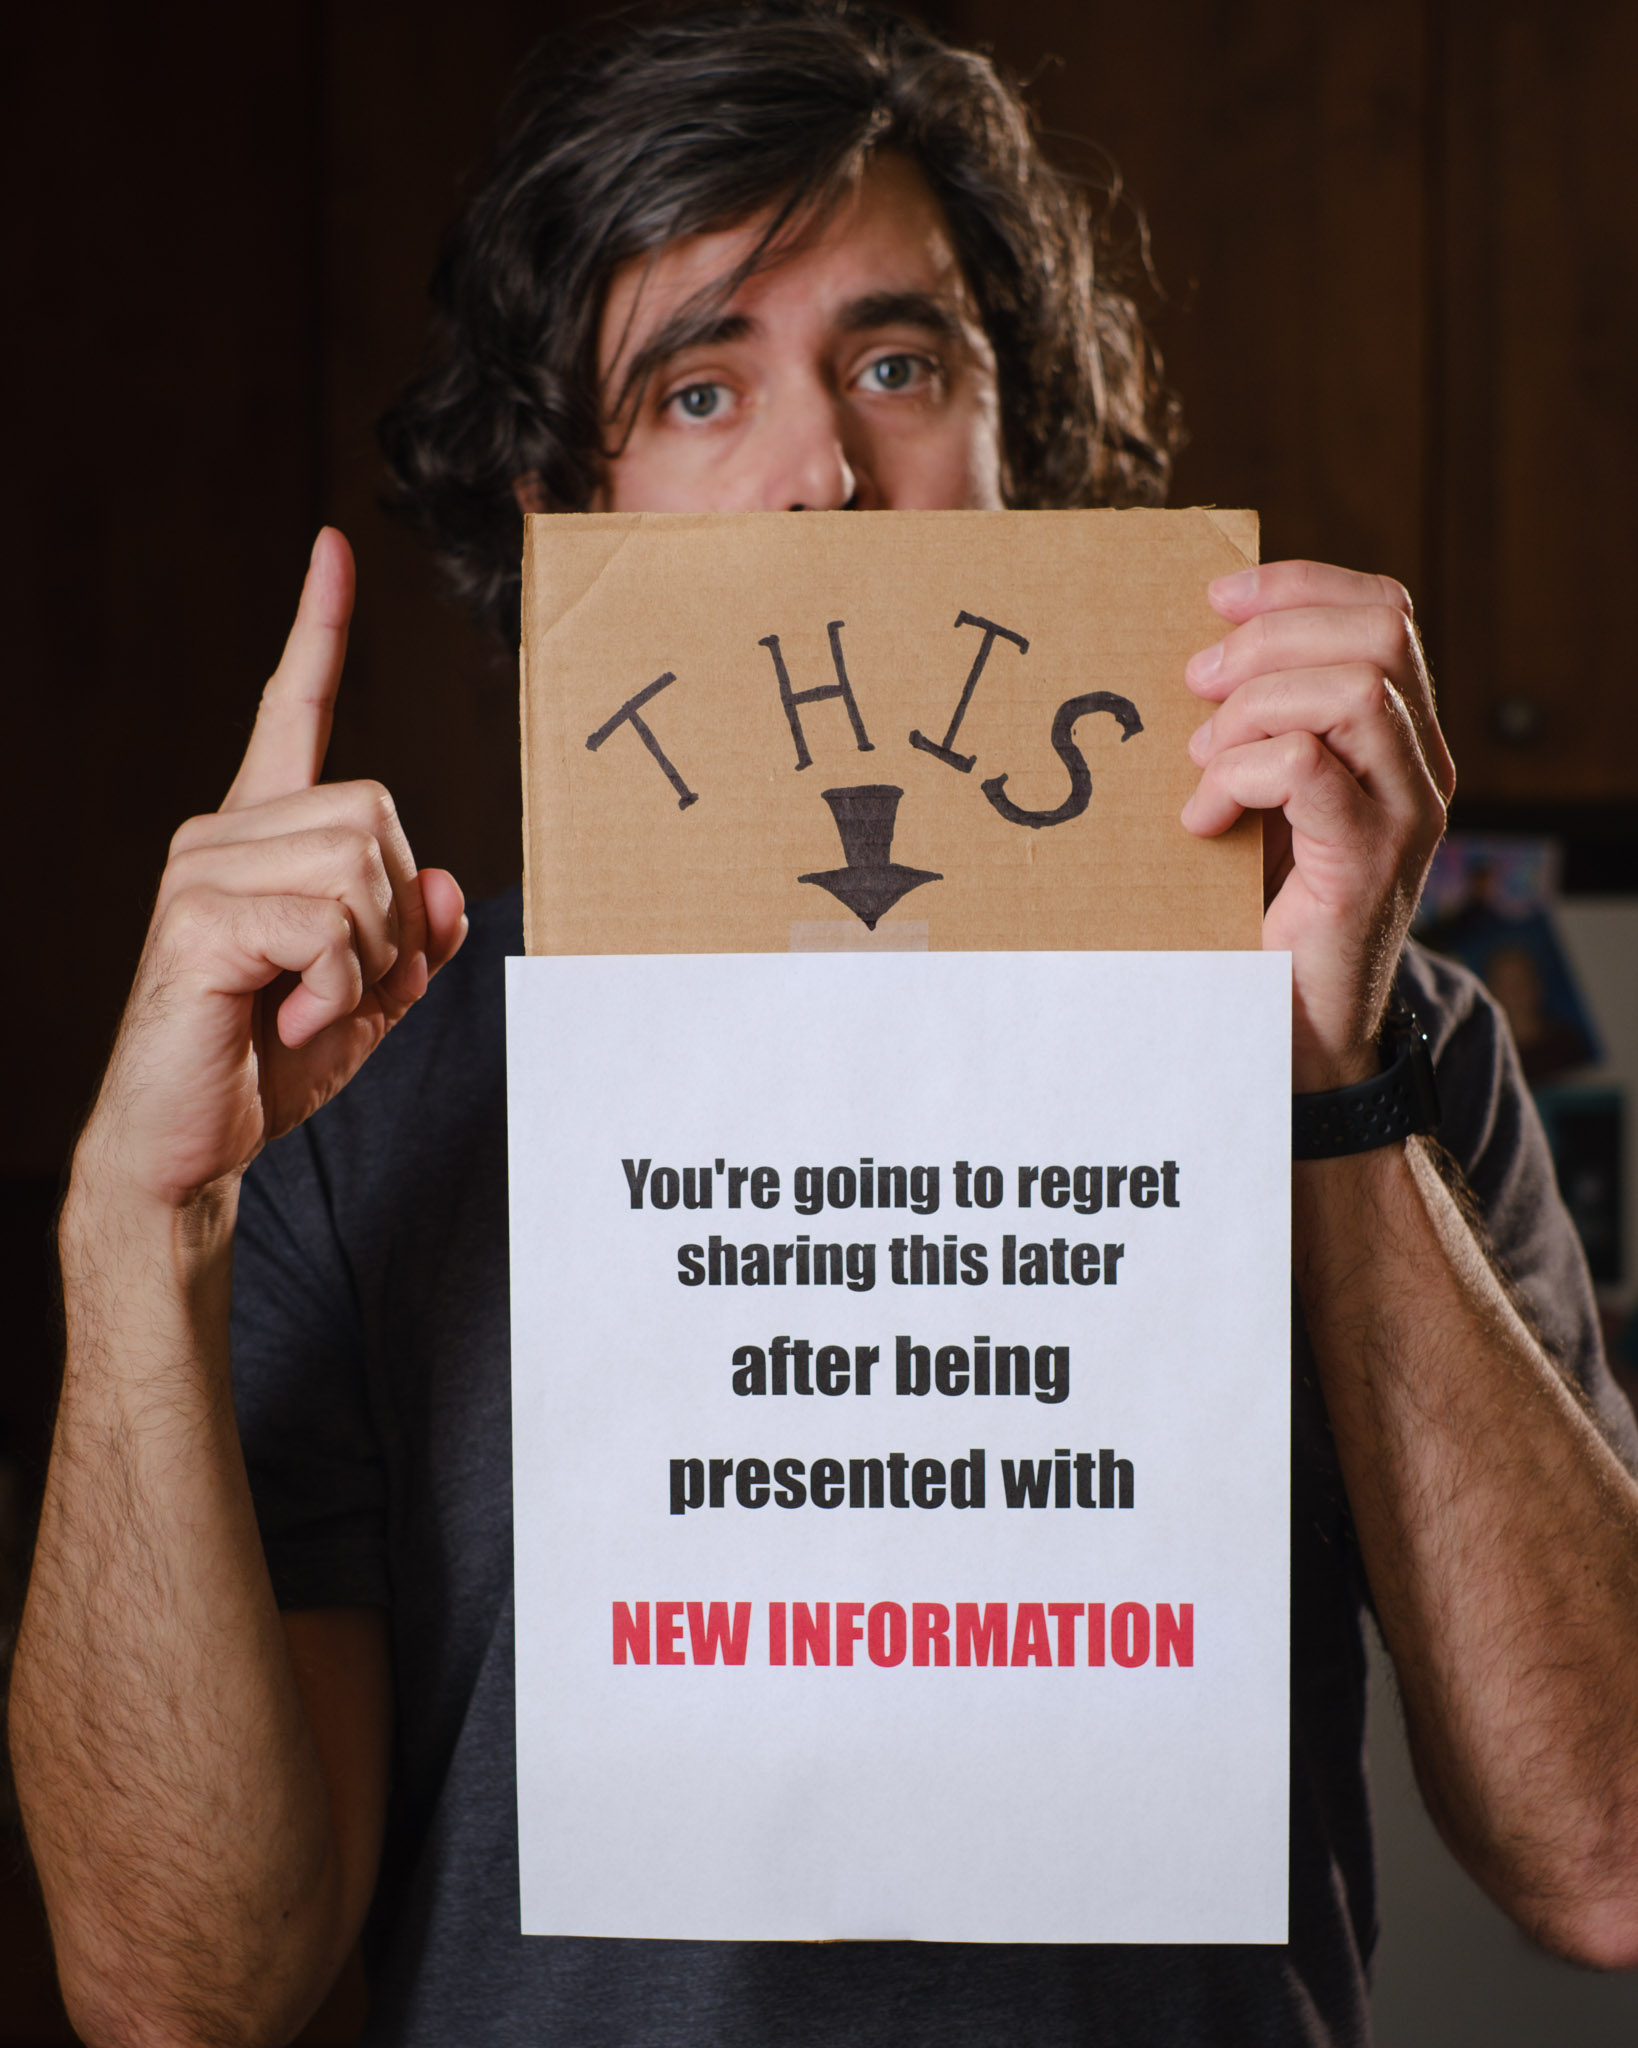 A photo of Daven holding a cardboard sign that reads "This. You're going to regret sharing this later after being presented with new information."